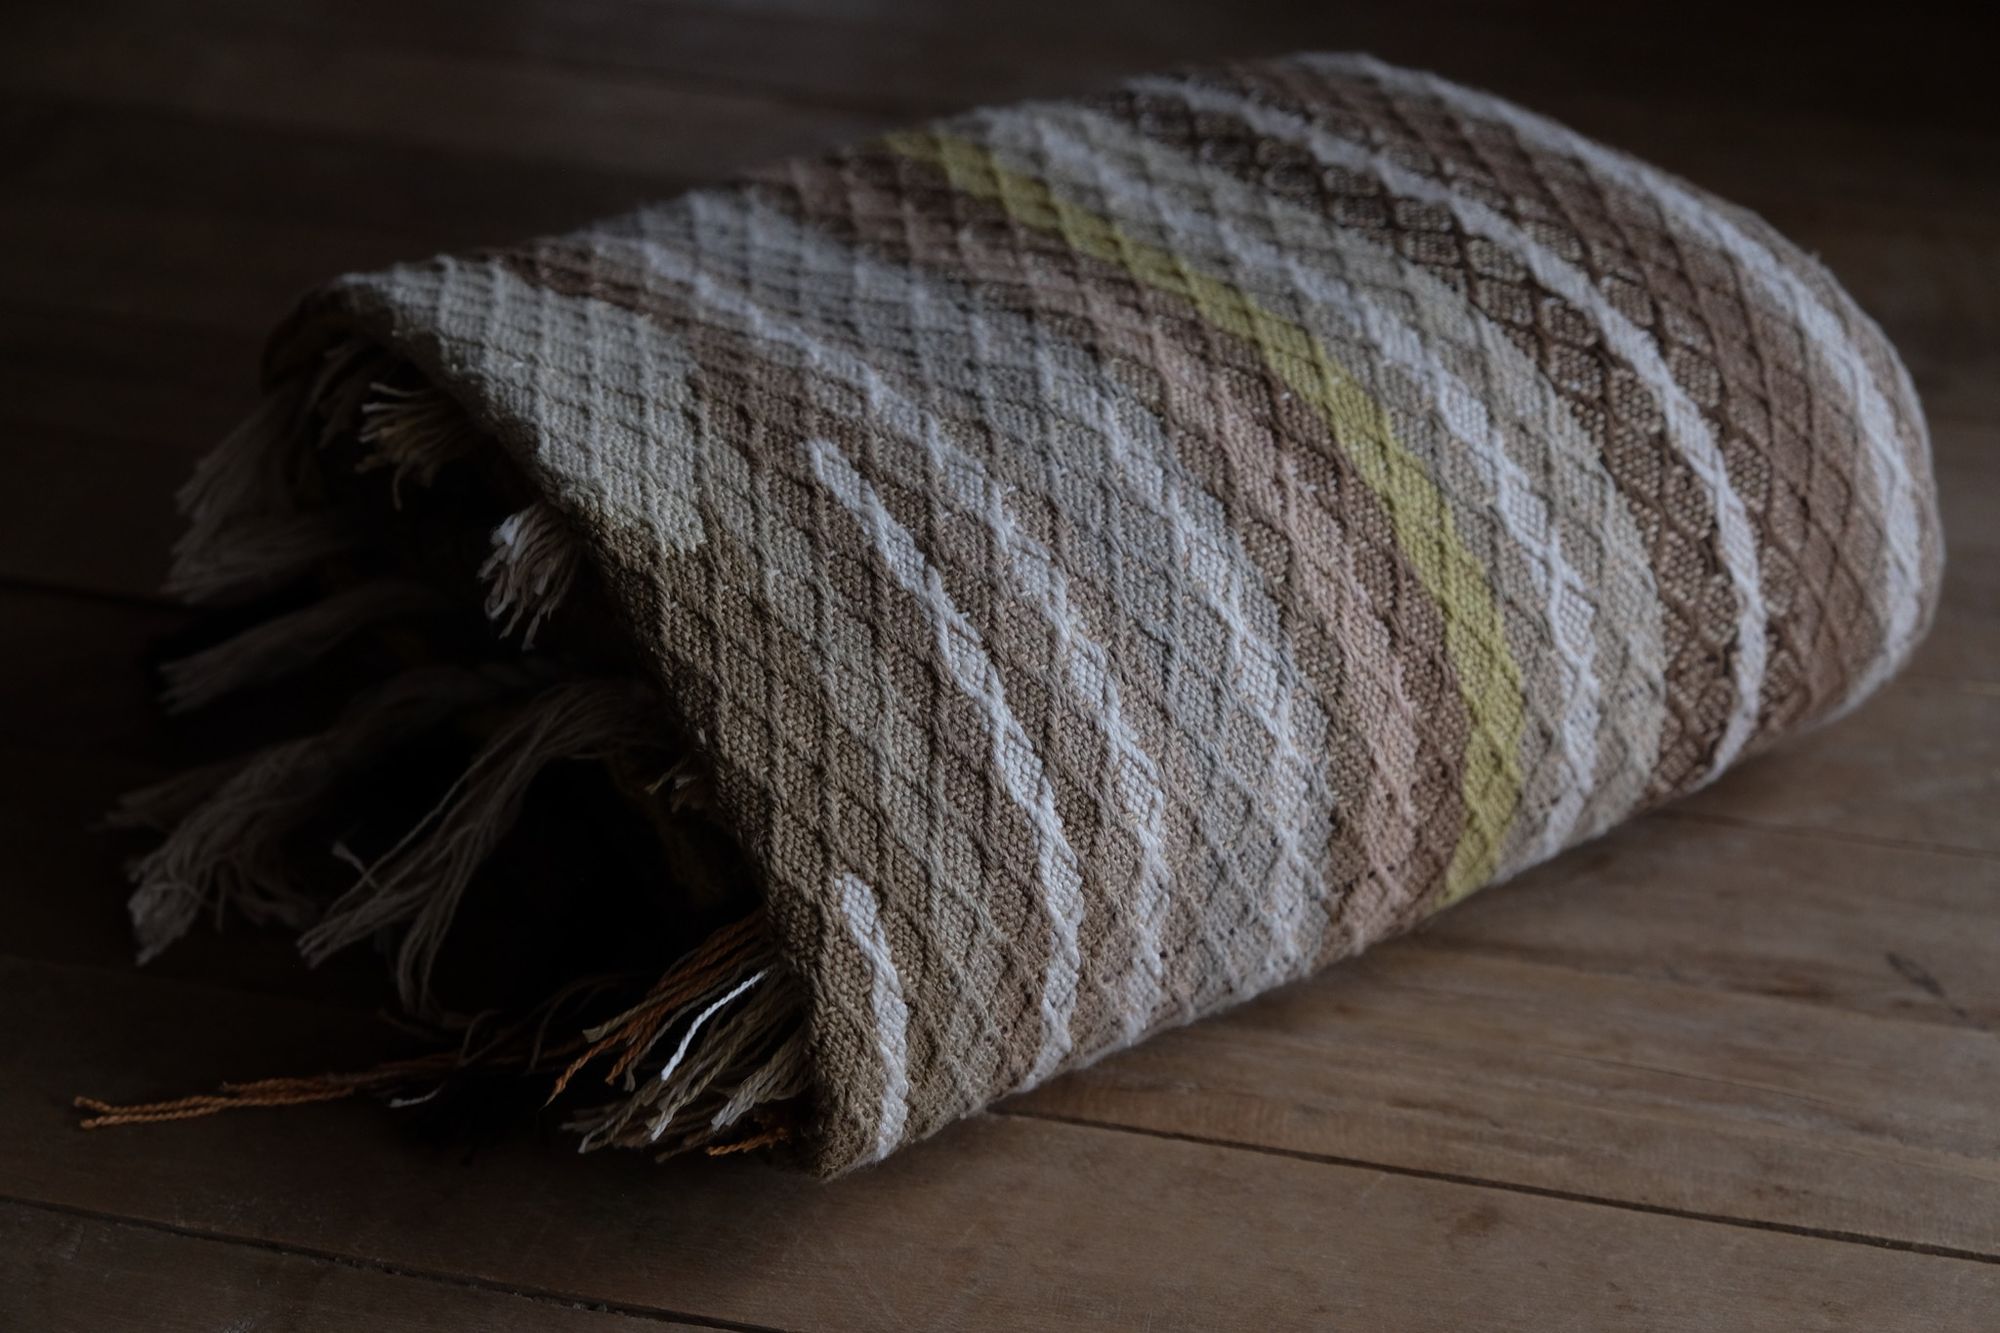 detail of handwoven diamond pattern and geometric details in browns, tan, yellows, whites and pinks laying on a wooden floor